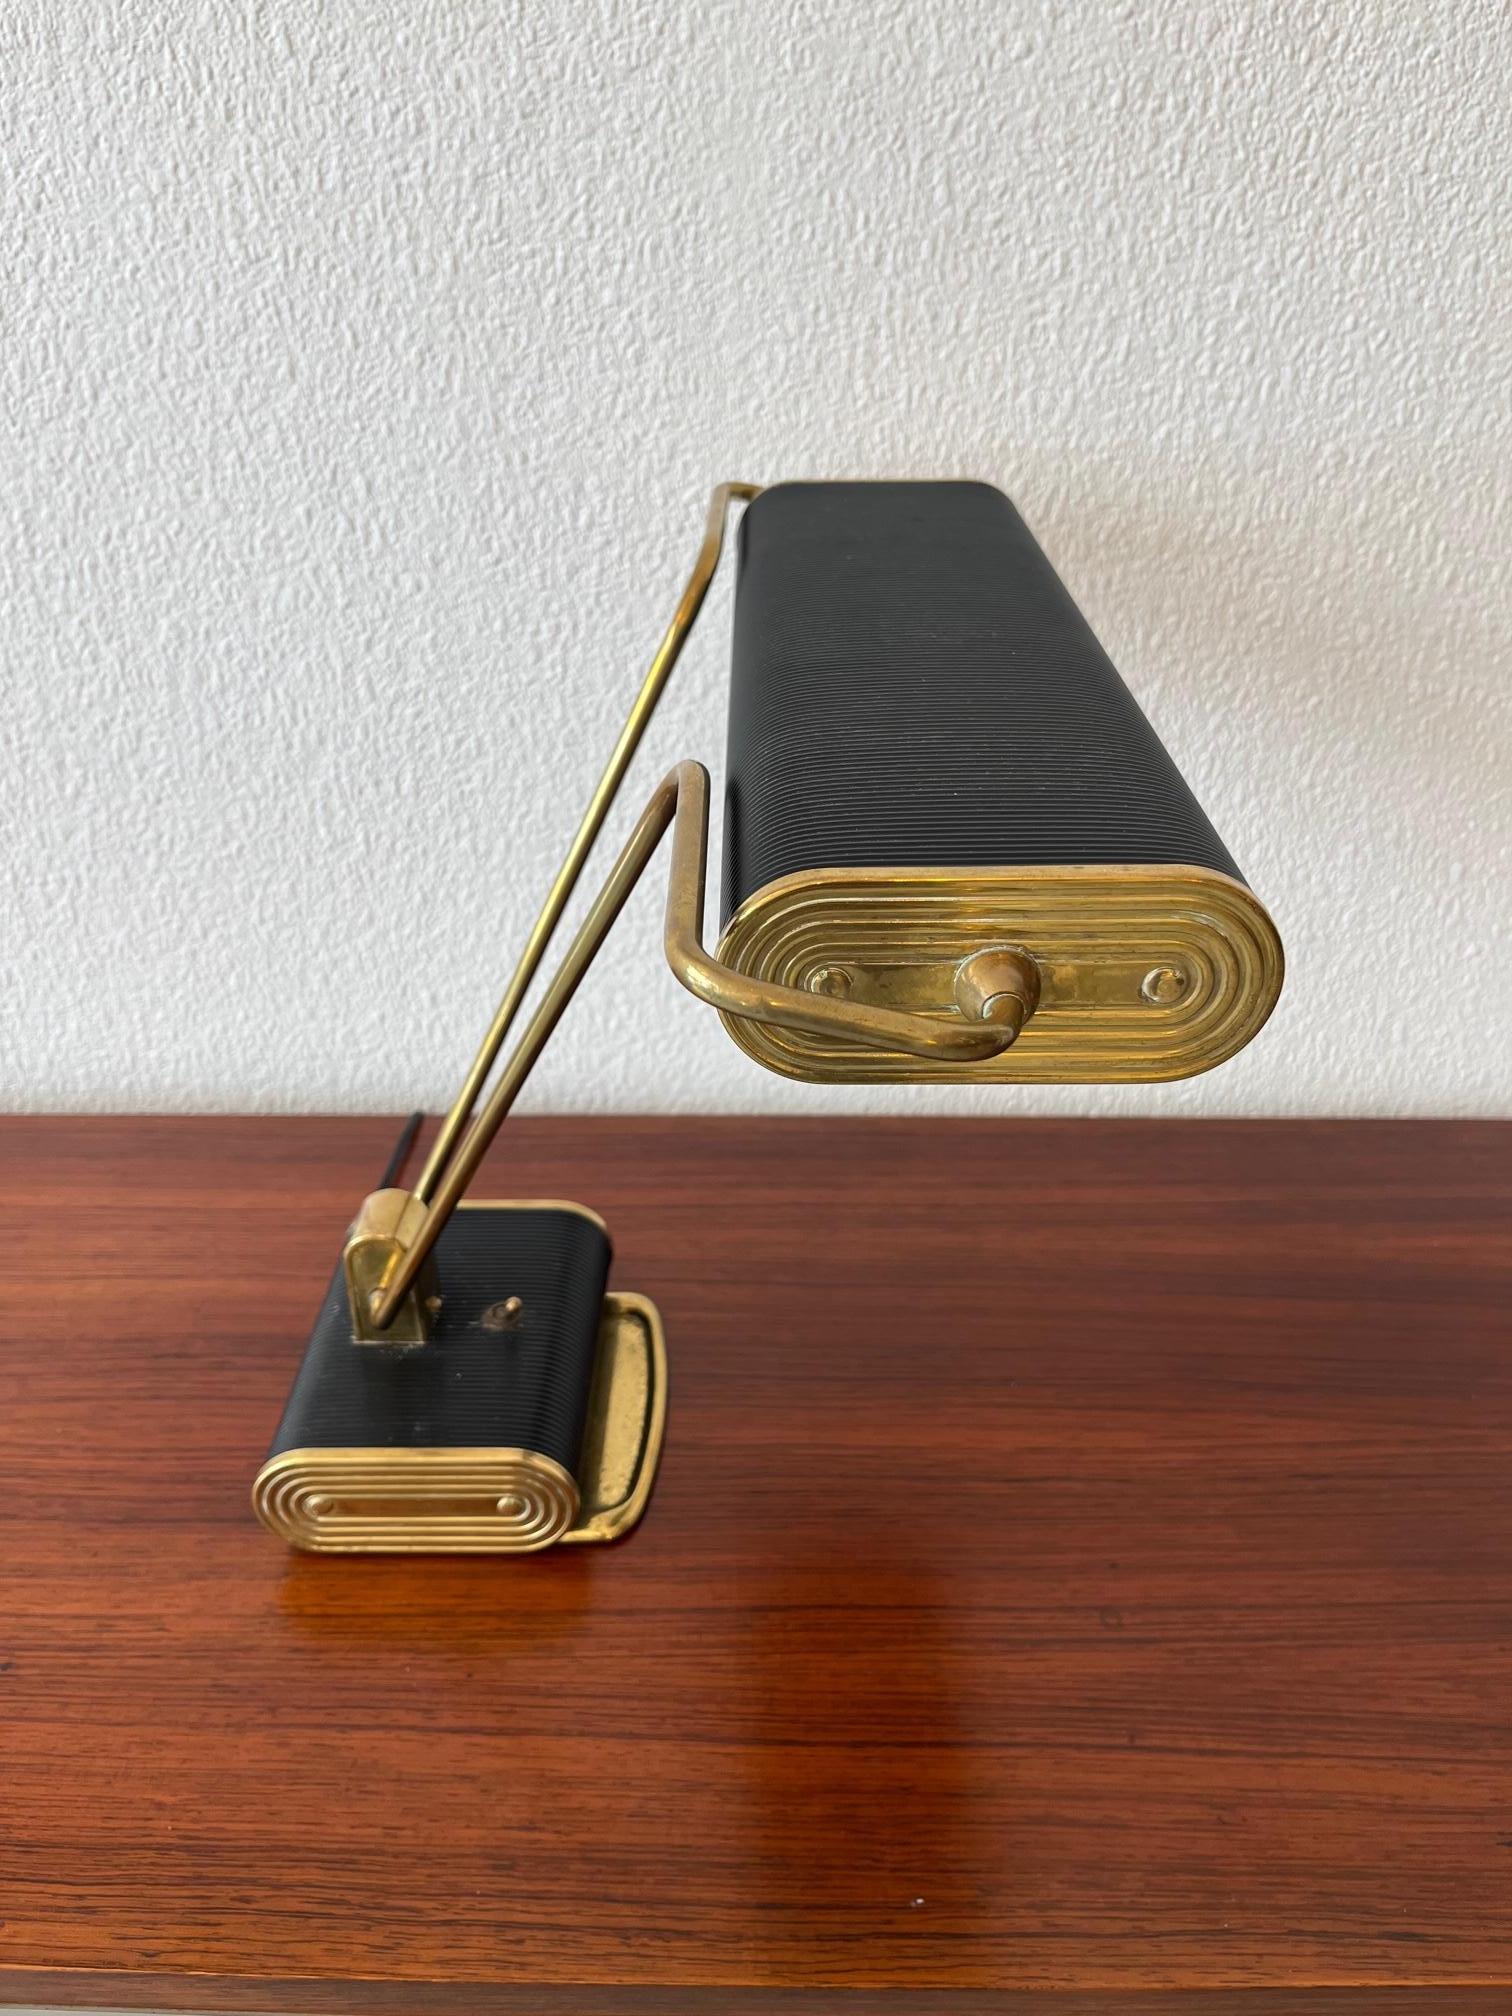 Brass & Aluminum Adjustable Desk Lamp by Eileen Gray for Jumo, France ca. 1940s For Sale 8